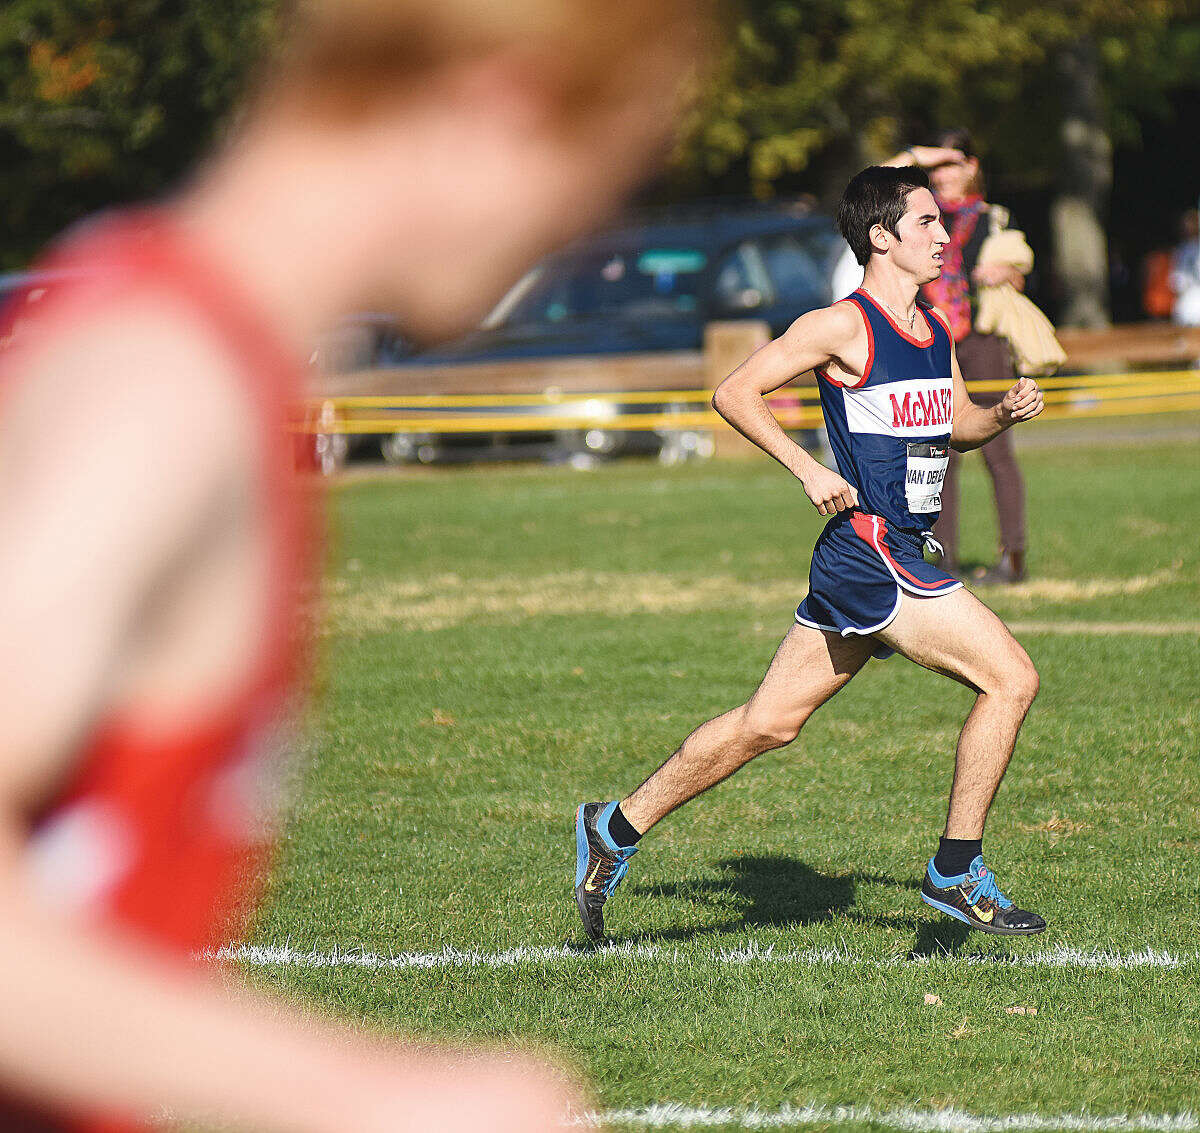 Hour photo/John Nash - Brien McMahon's Eric van der Els pulls away to an early lead right at the start of Wednesdsay's FCIAC boys cross country varsity championship race en route to becoming the first Senators runner to ever win the league title at Waveny Park in New Canaan.